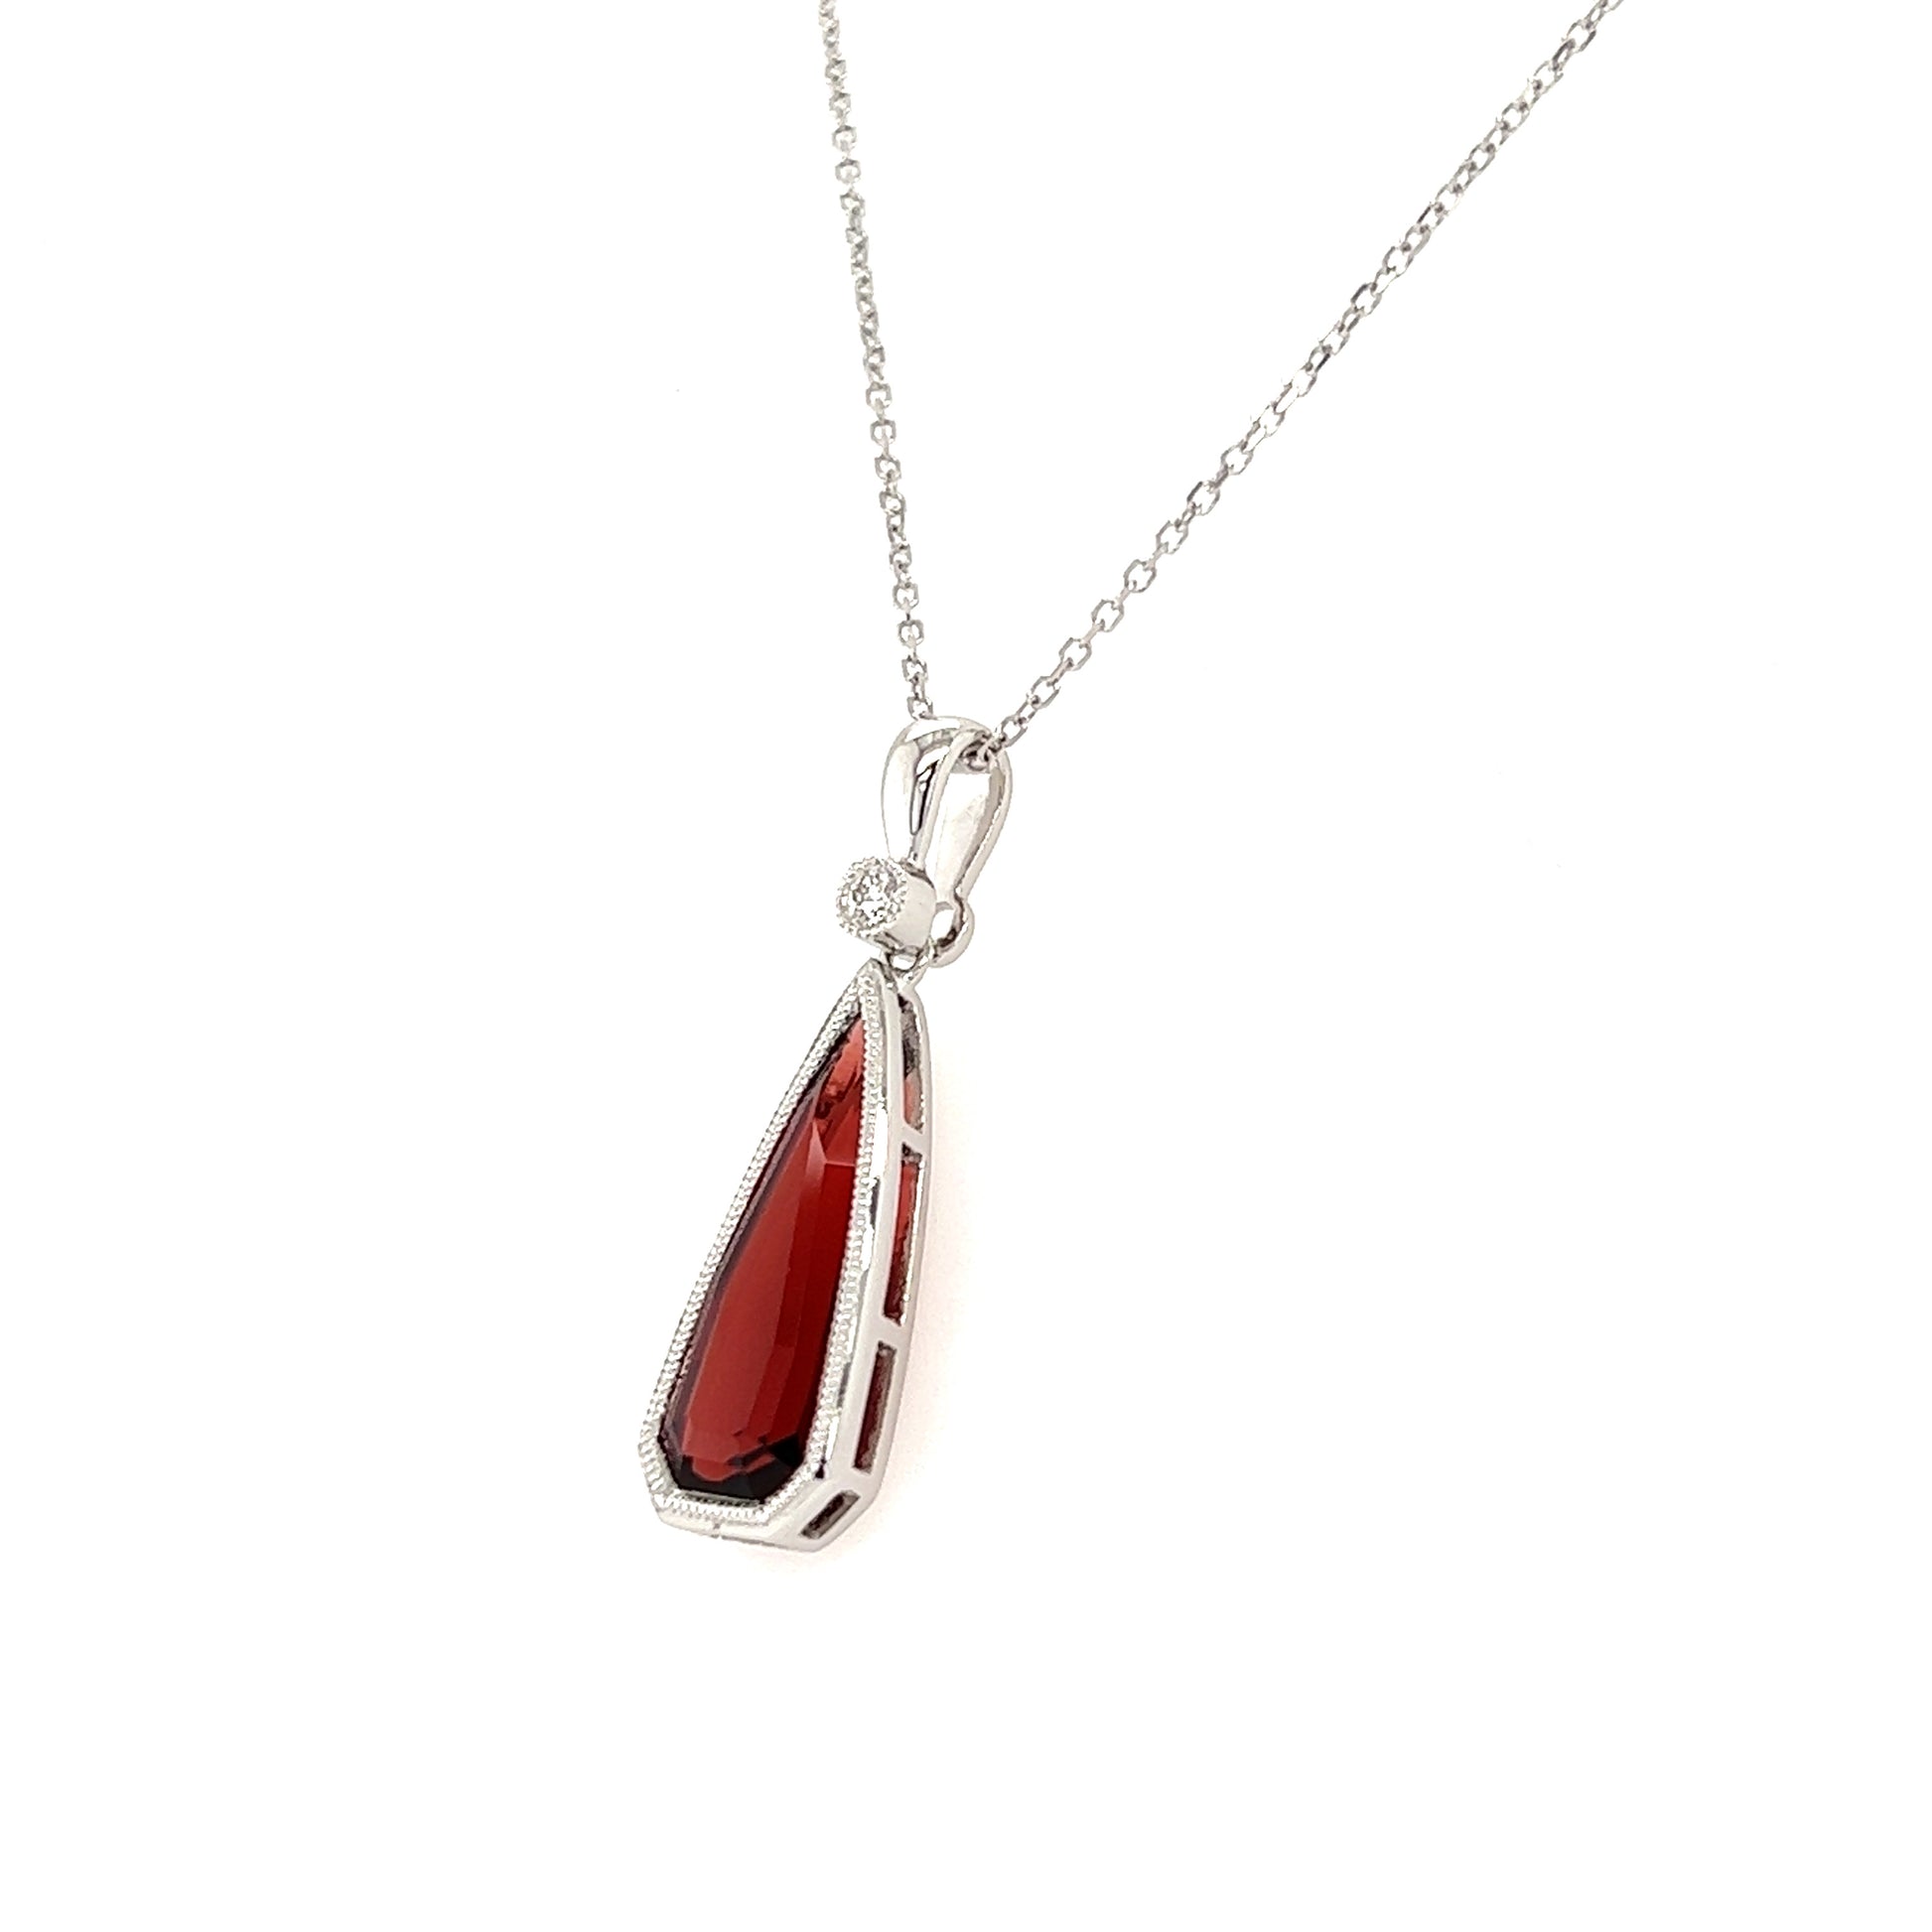 Irregular Garnet Pendant with Diamonds Accent in 14K White Gold Pendant and Chain Left Side View